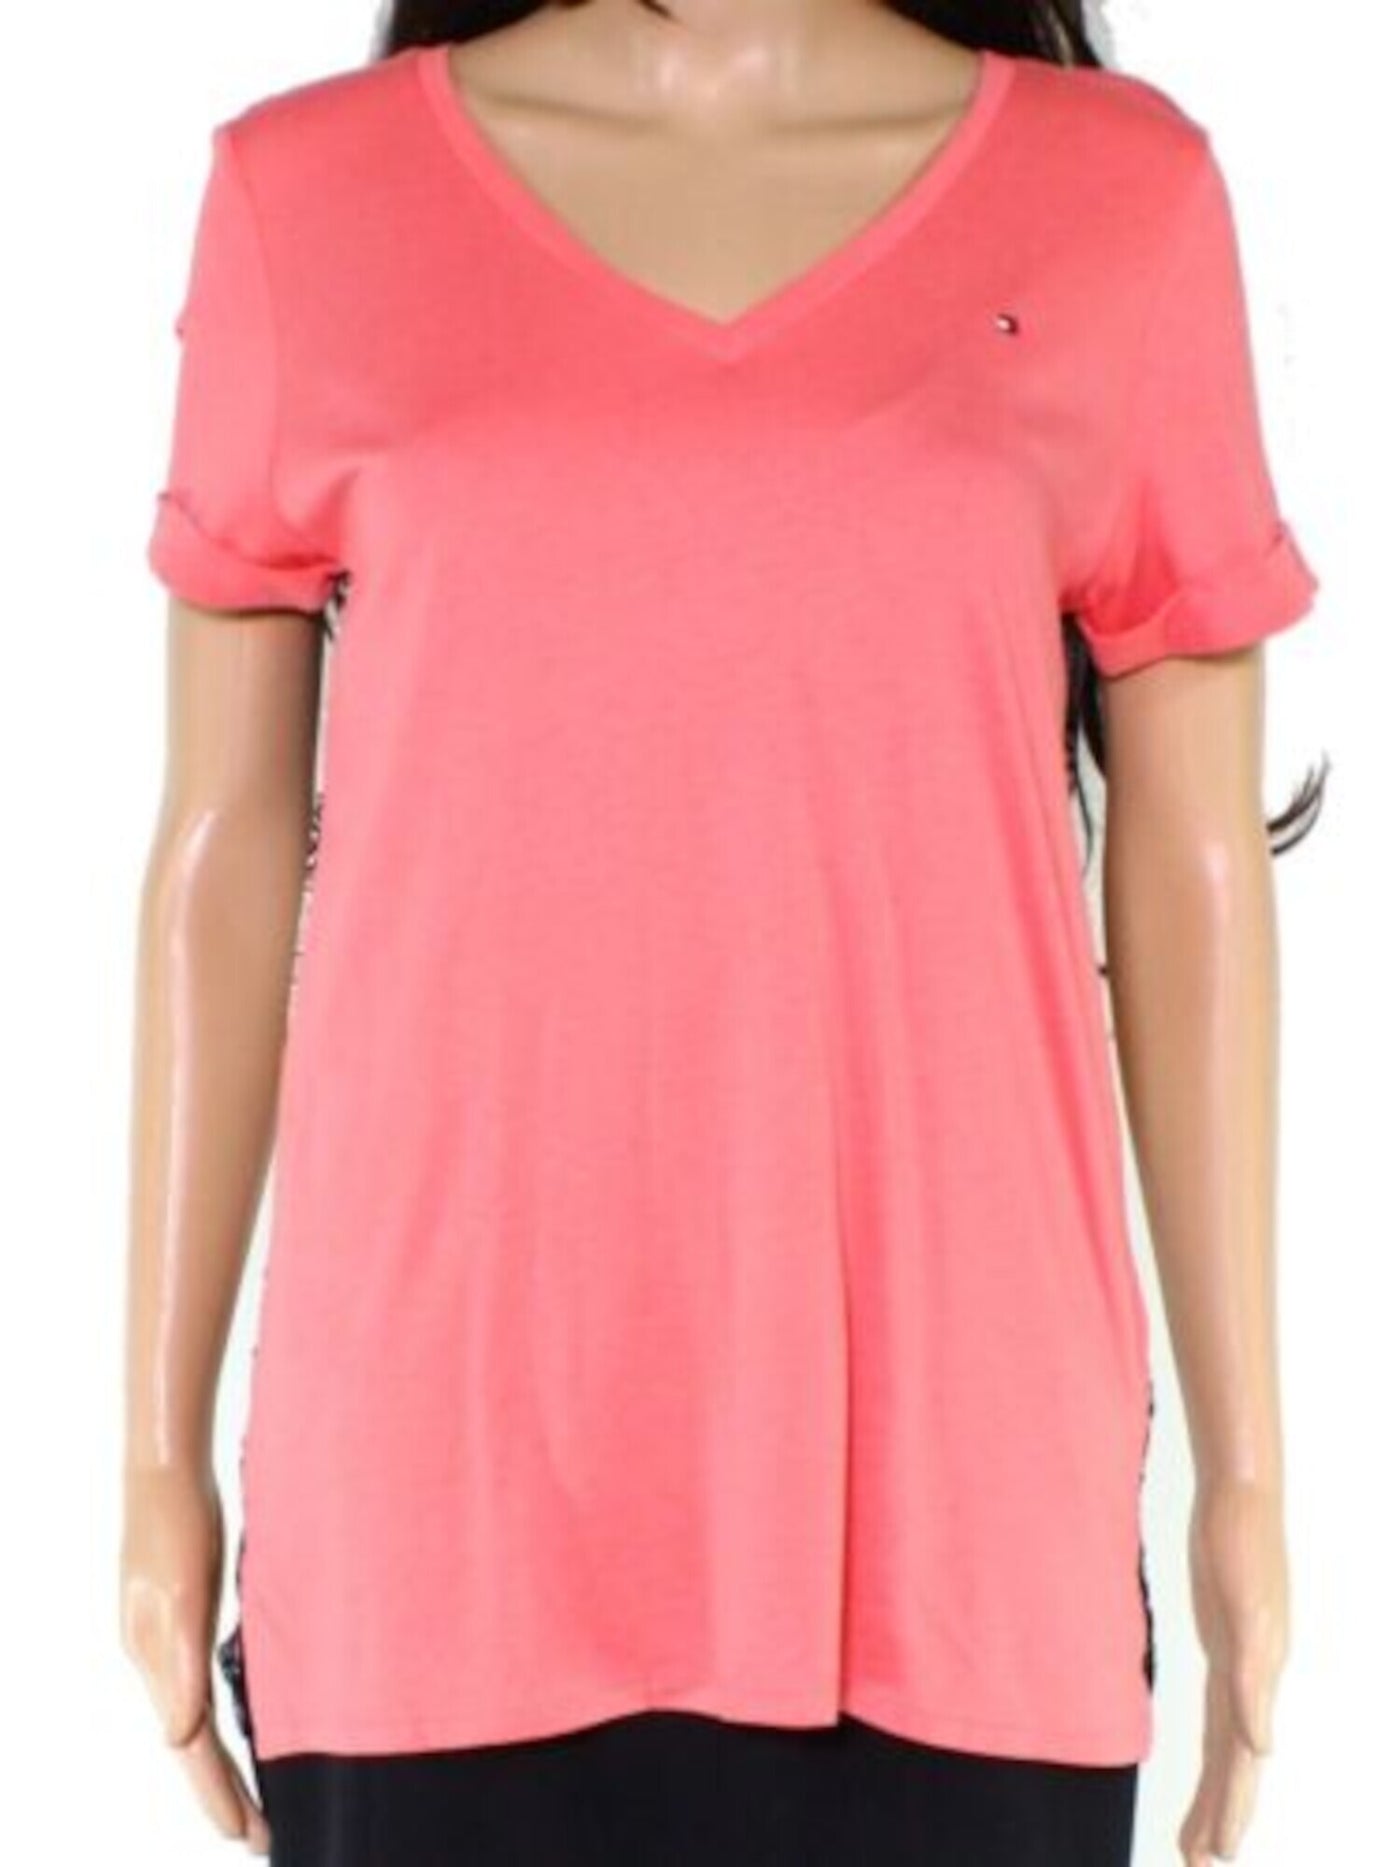 TOMMY HILFIGER Womens Pink Printed Short Sleeve V Neck Top XS